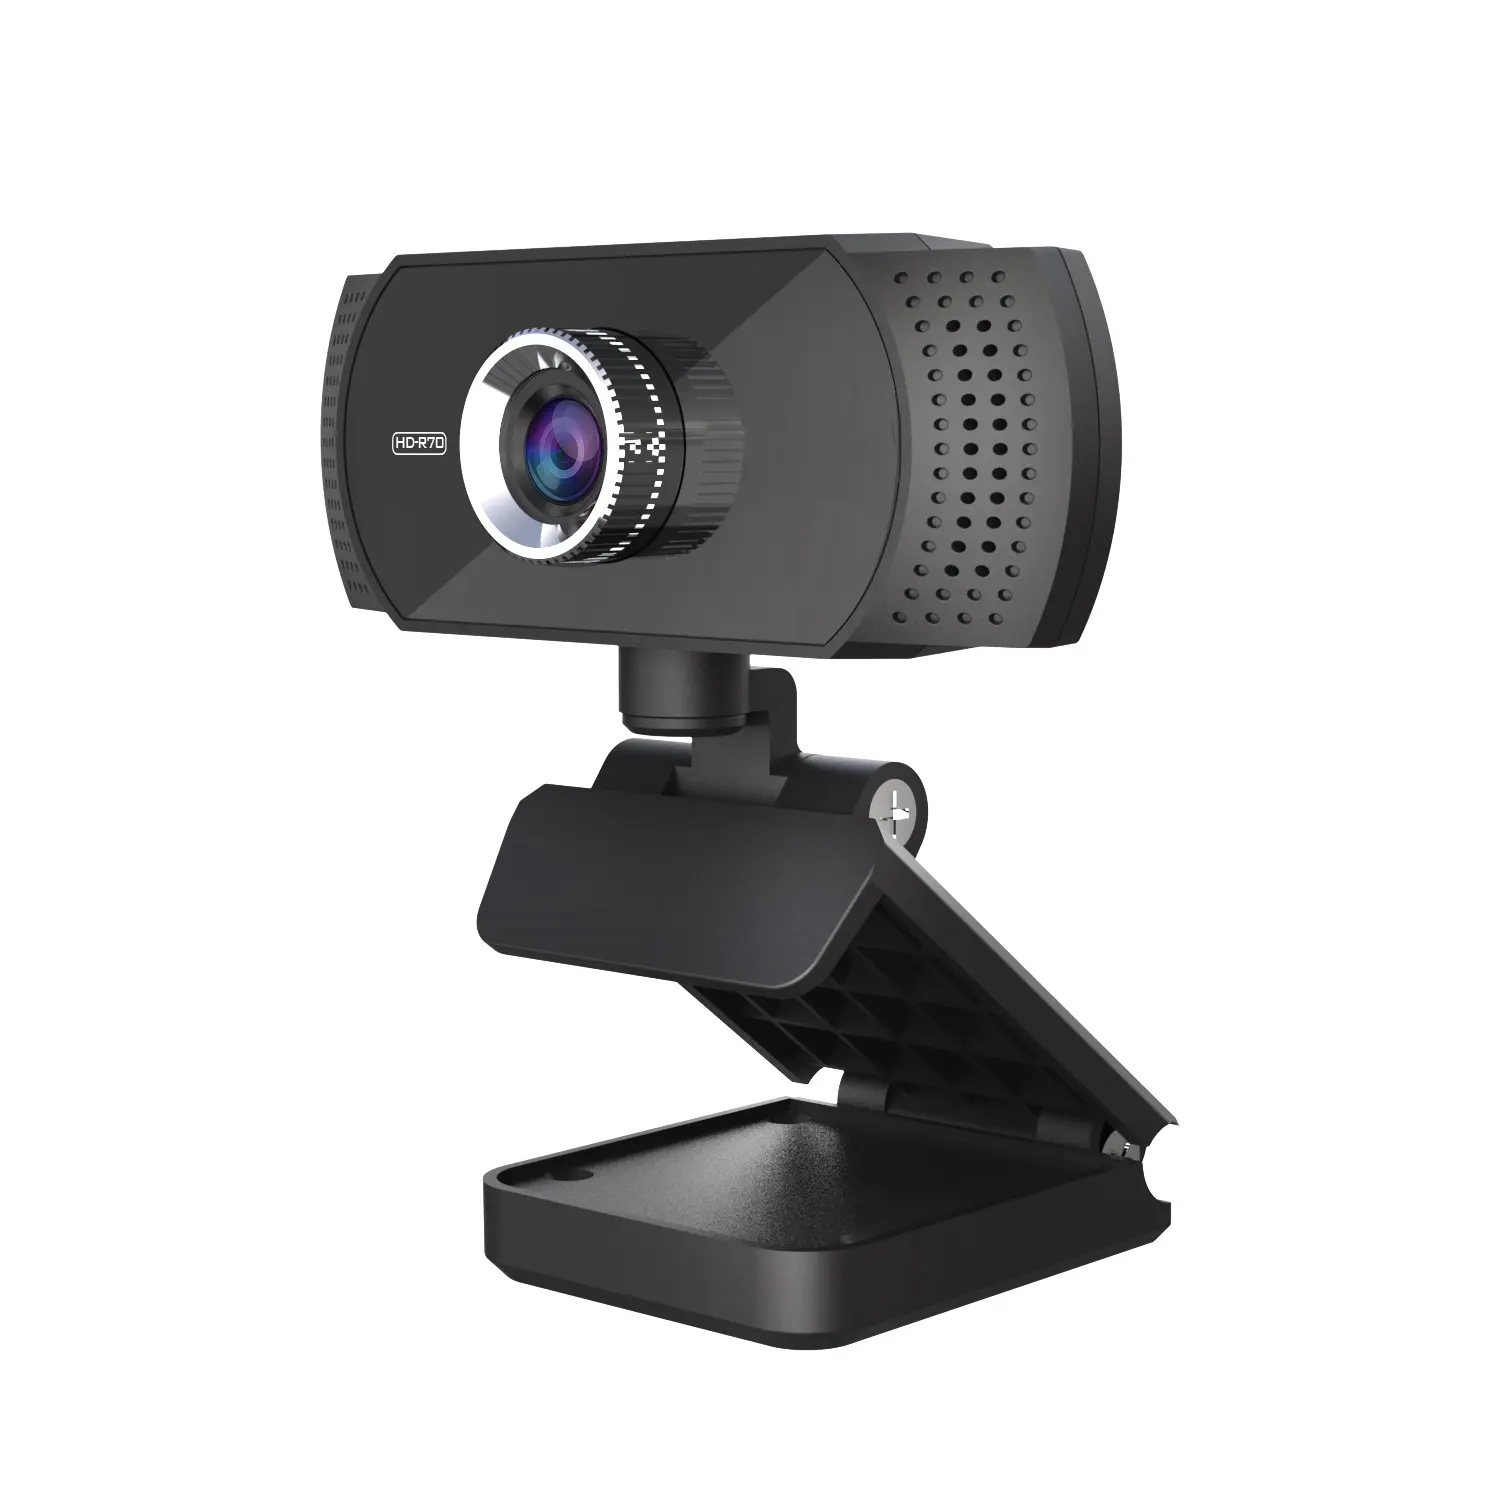 1080p 30PFS Webcam Online Web Camera with bulit-in microphone for PC Video Conference